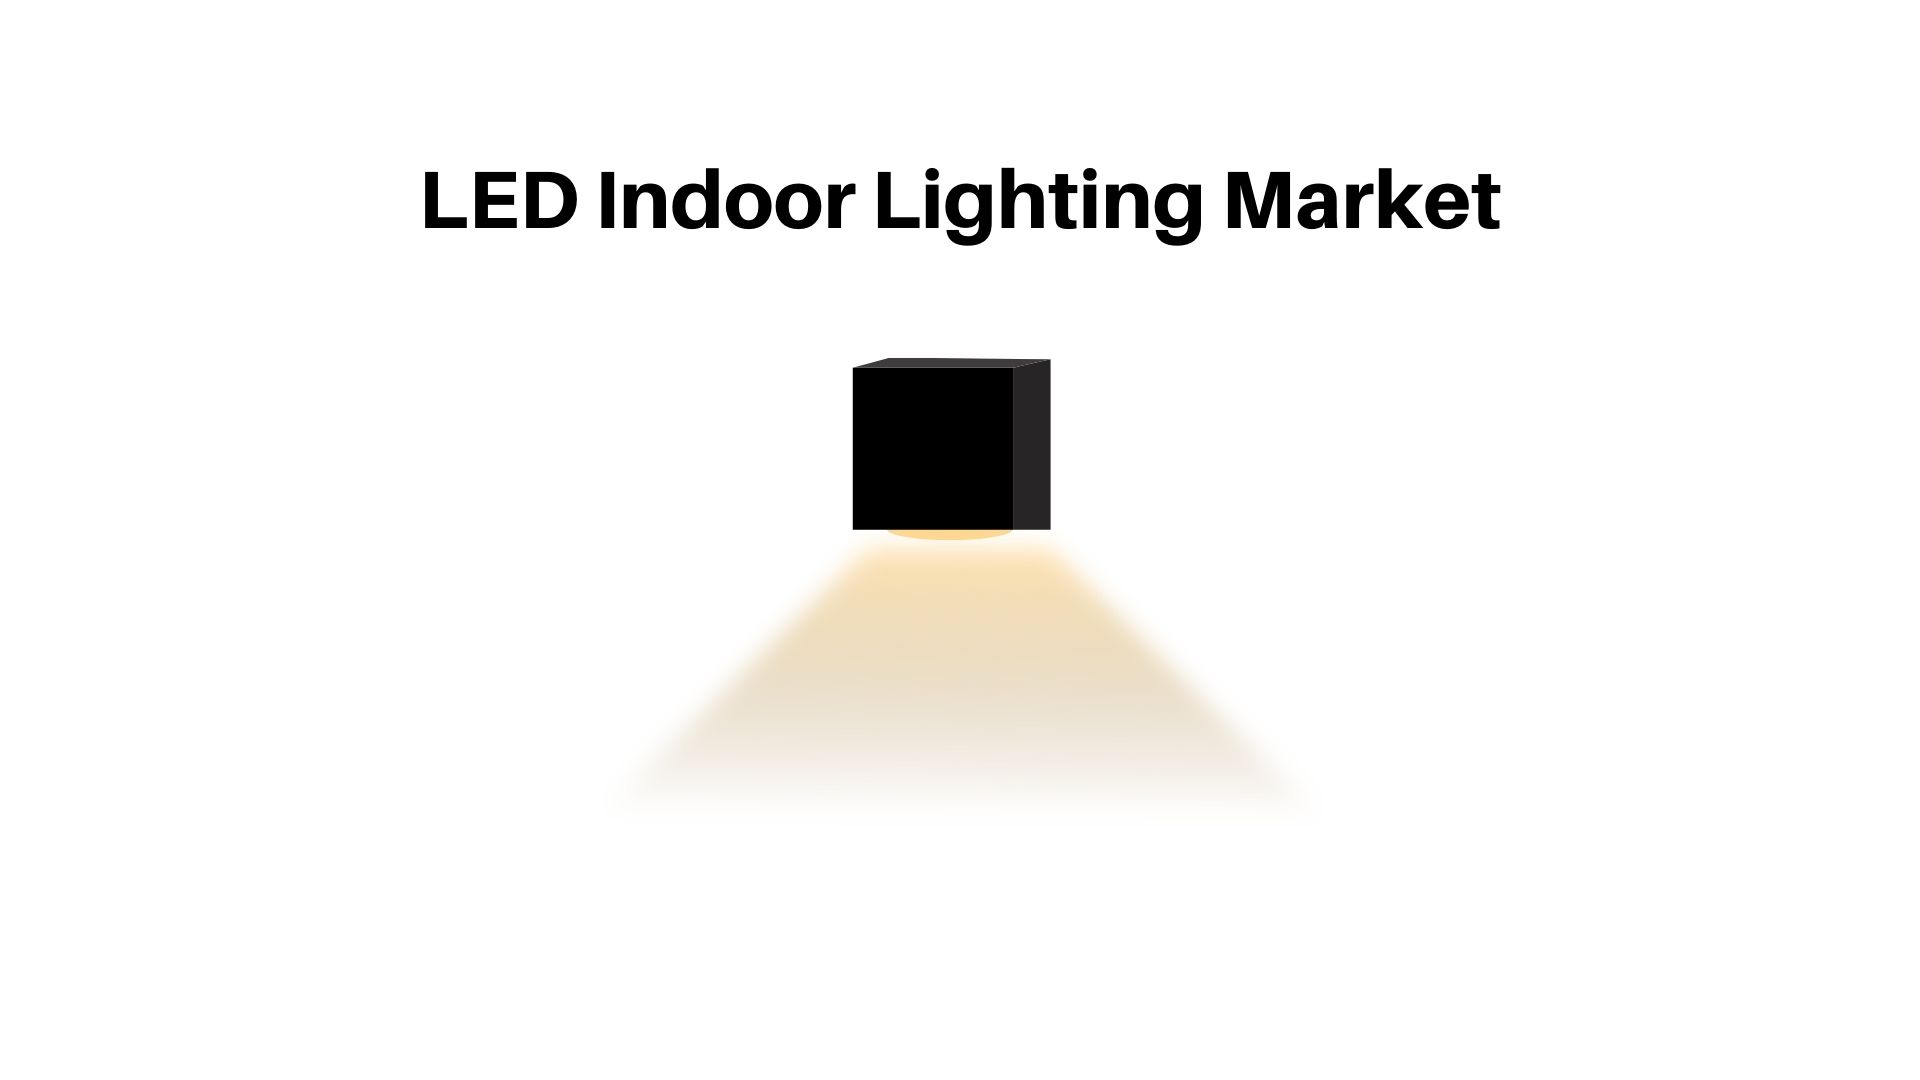 LED Indoor Lighting Market is poised to grow at a CAGR of 12.5% by 2032